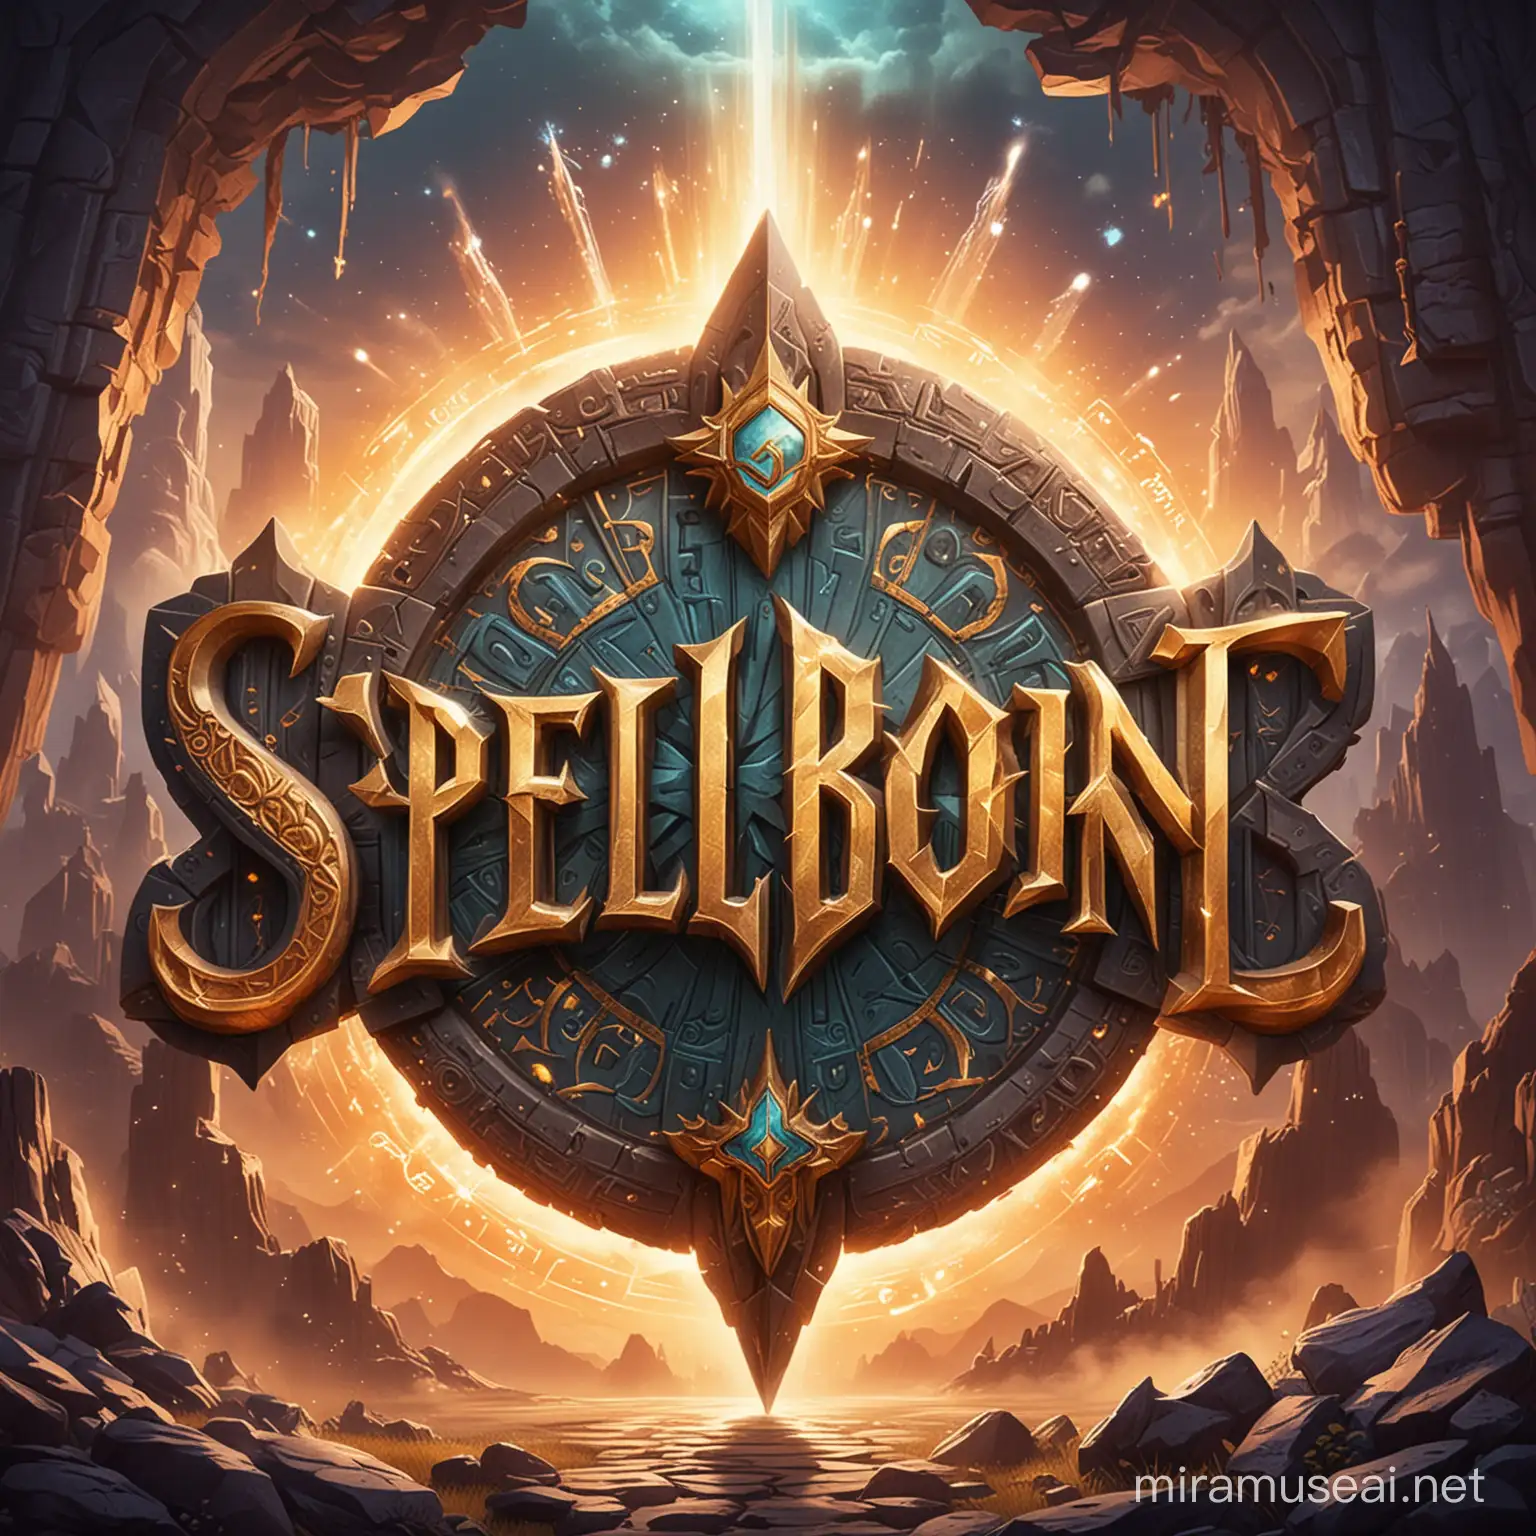 The word "Spellbound" written in intricate, magical glyphs, in the style of Sunfire Summit art with ethereal elements and a prominent shield backdrop, akin to a game logo, suitable for a captivating mobile game background.